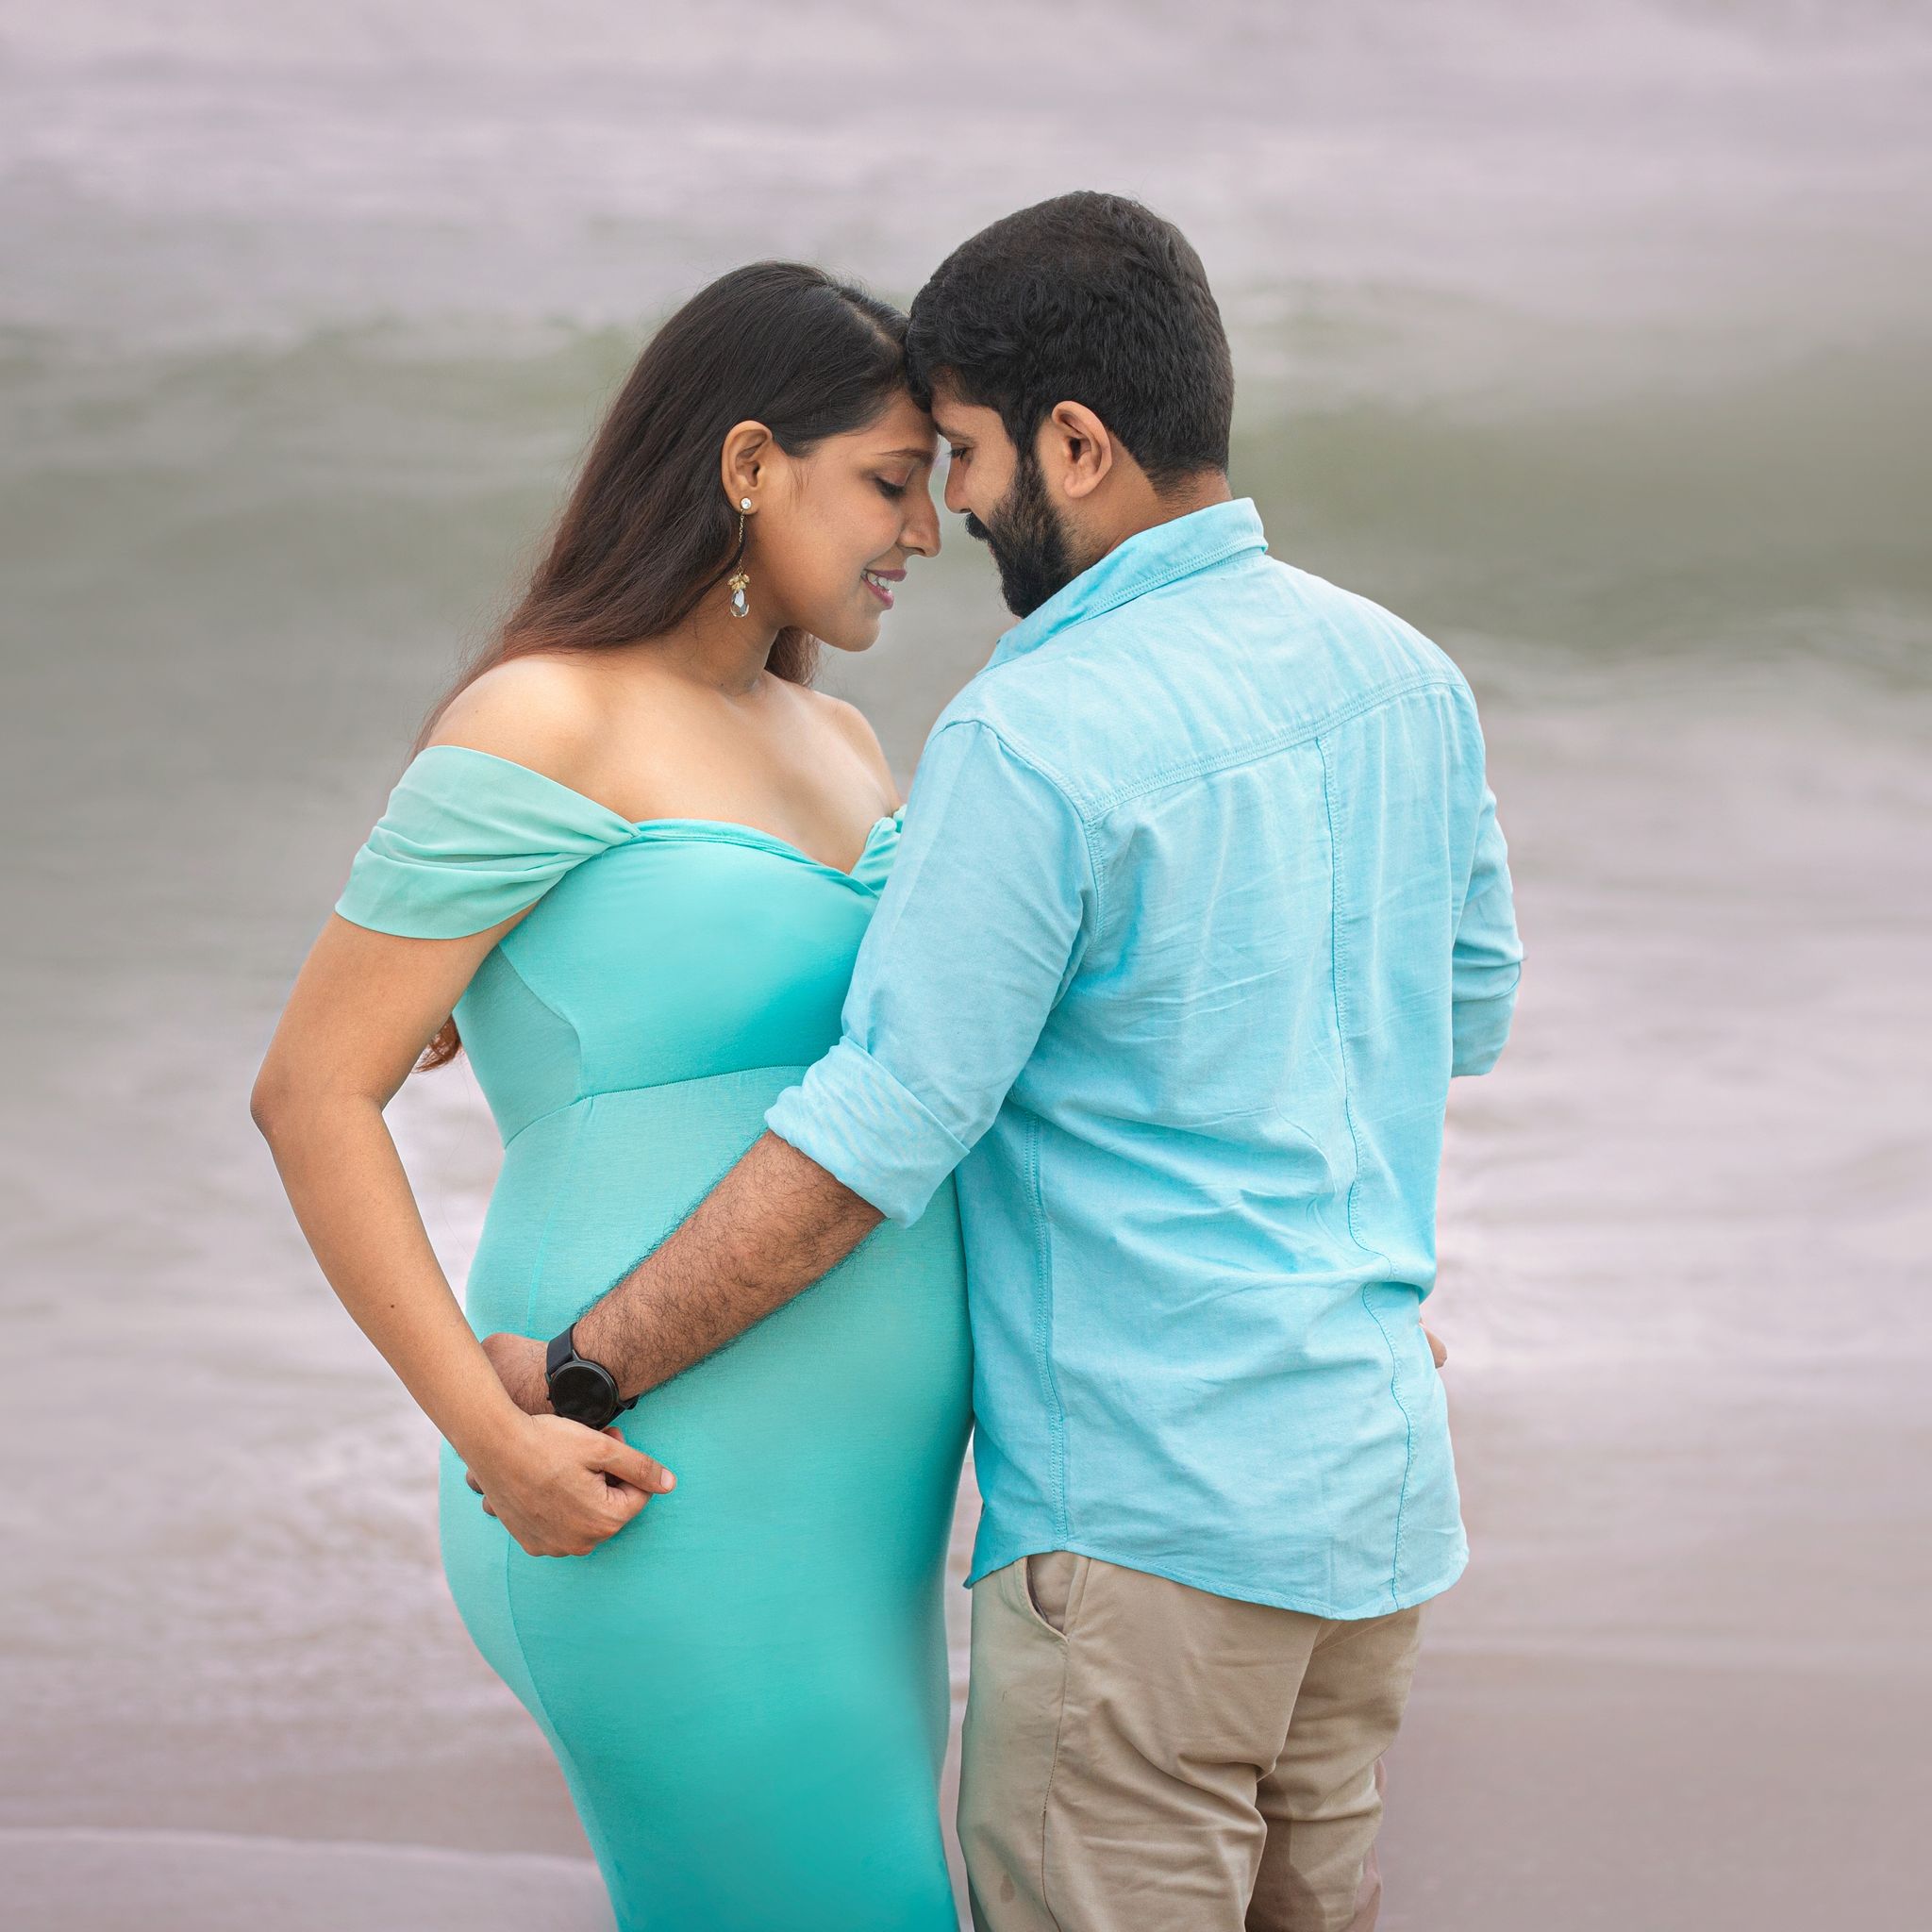 What are the best photography poses for pregnant women (maternity photo  shoot)? Could you add some photos to illustrate? - Quora